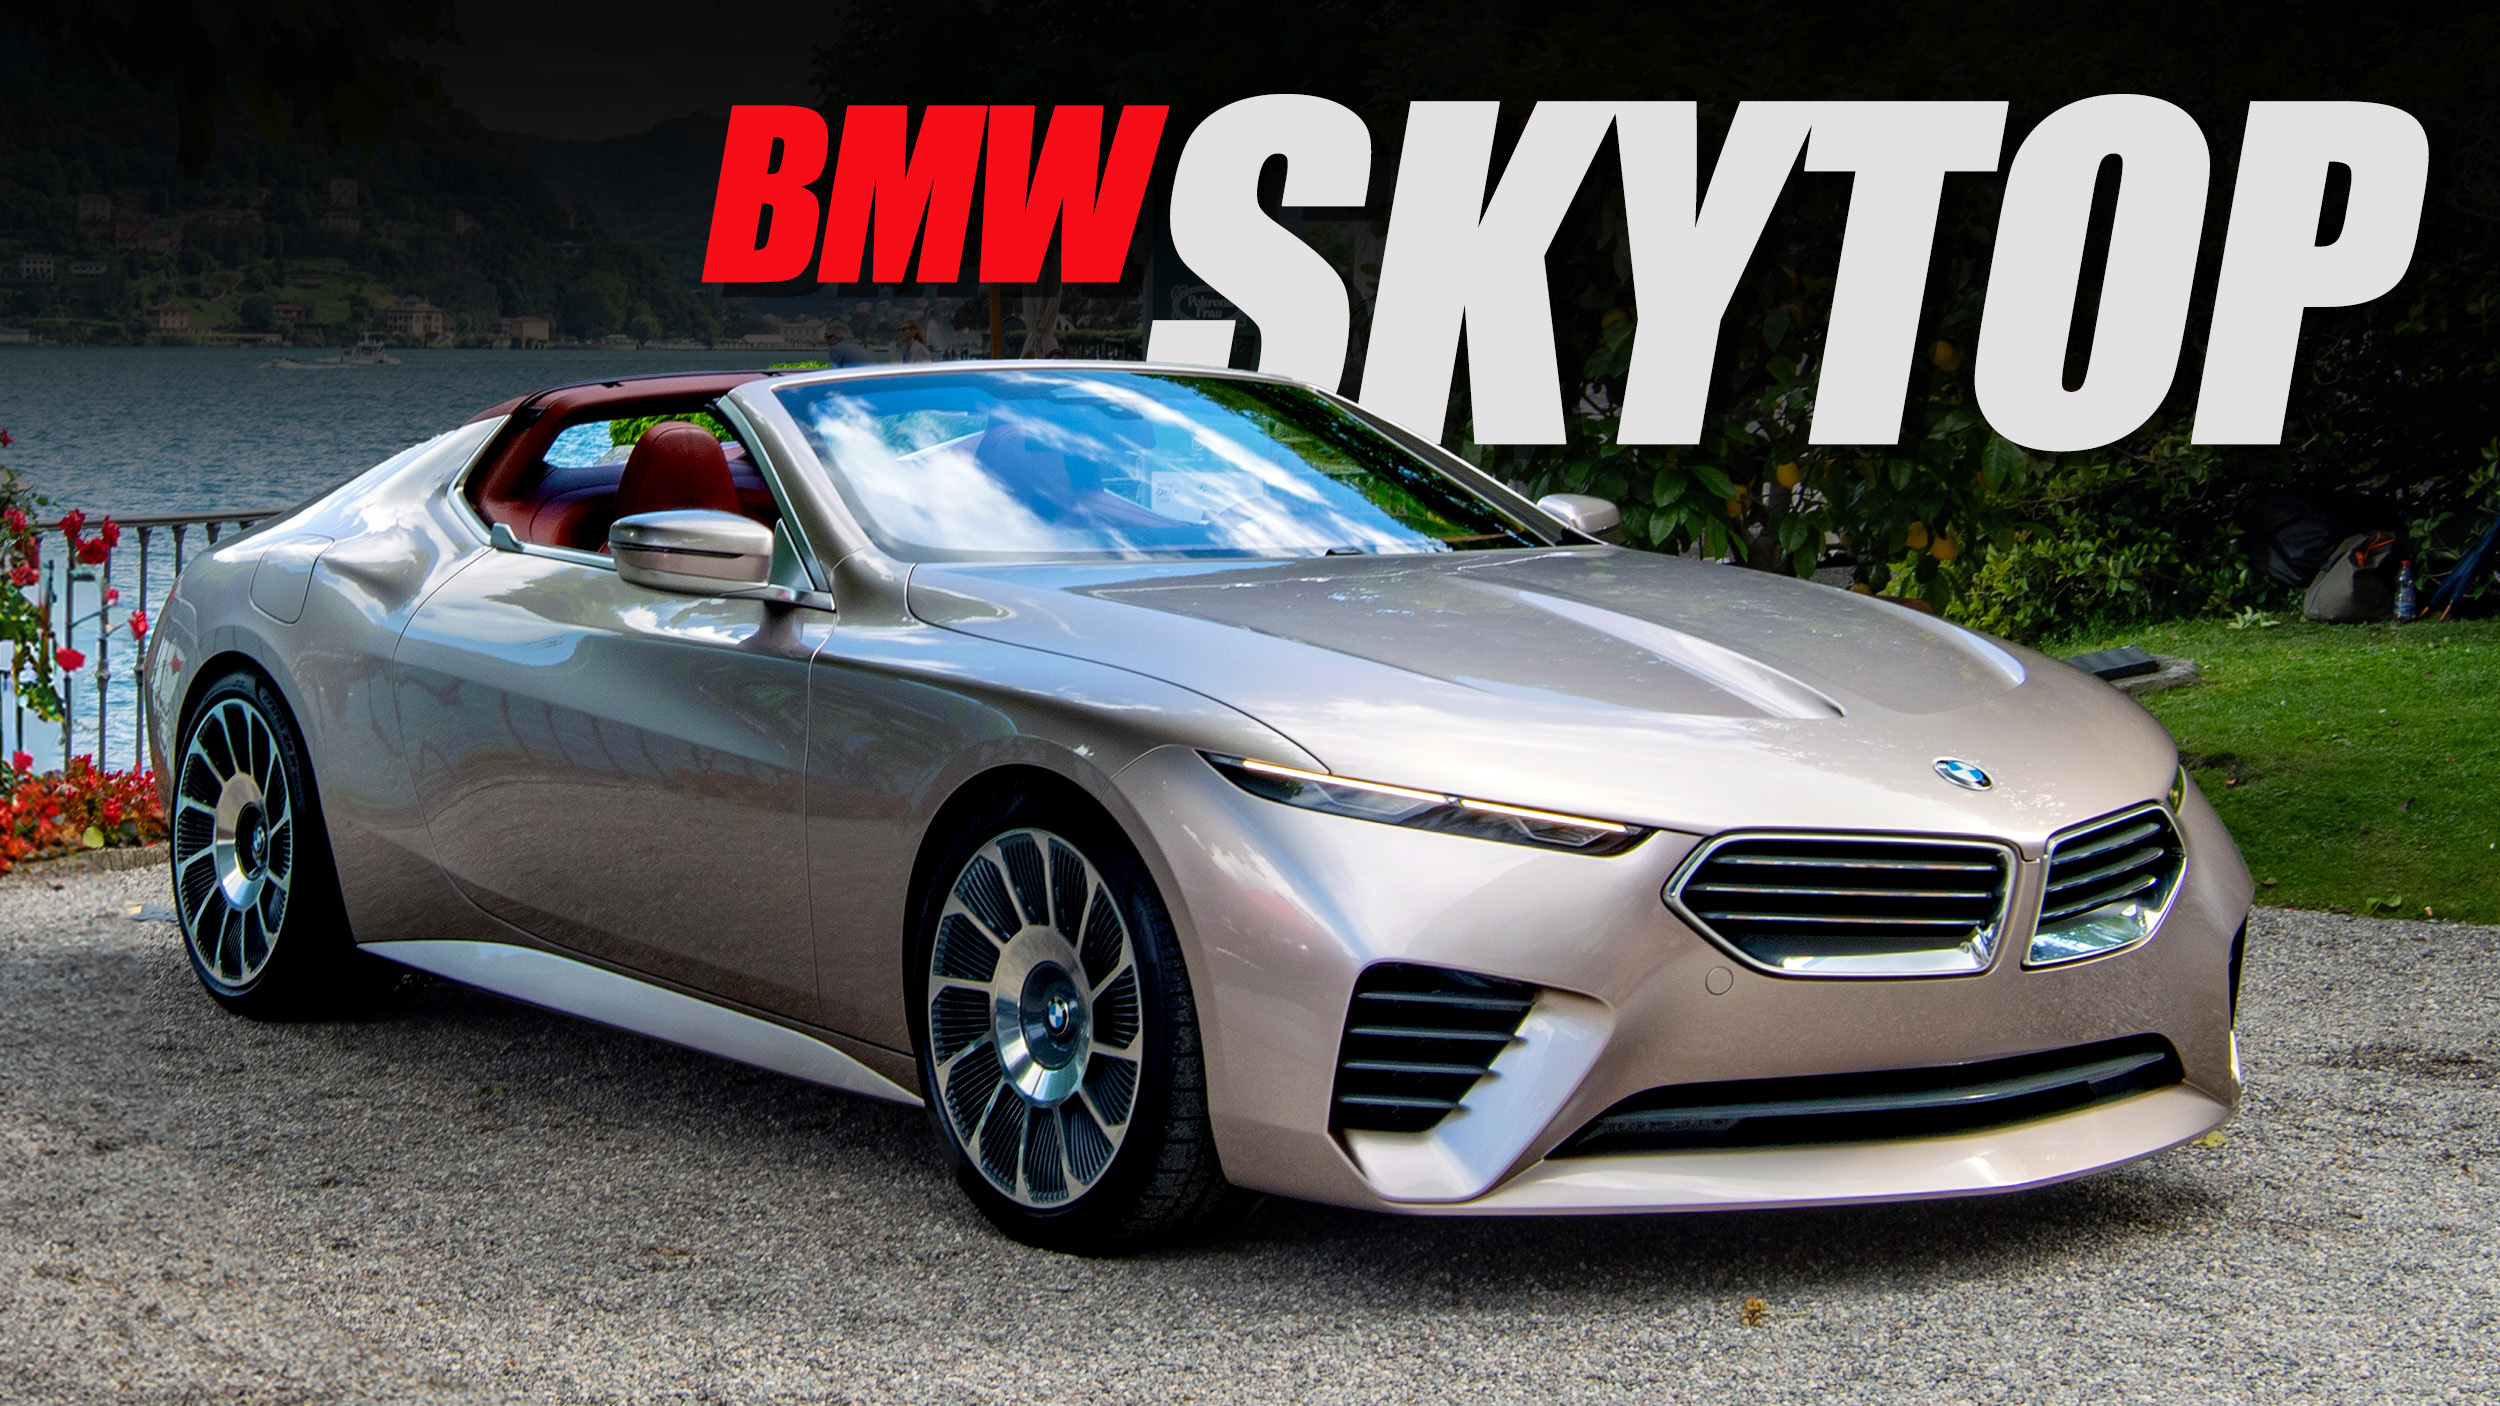 BMW Concept Skytop Is The Prettiest Bimmer In A Decade (Live Photos)